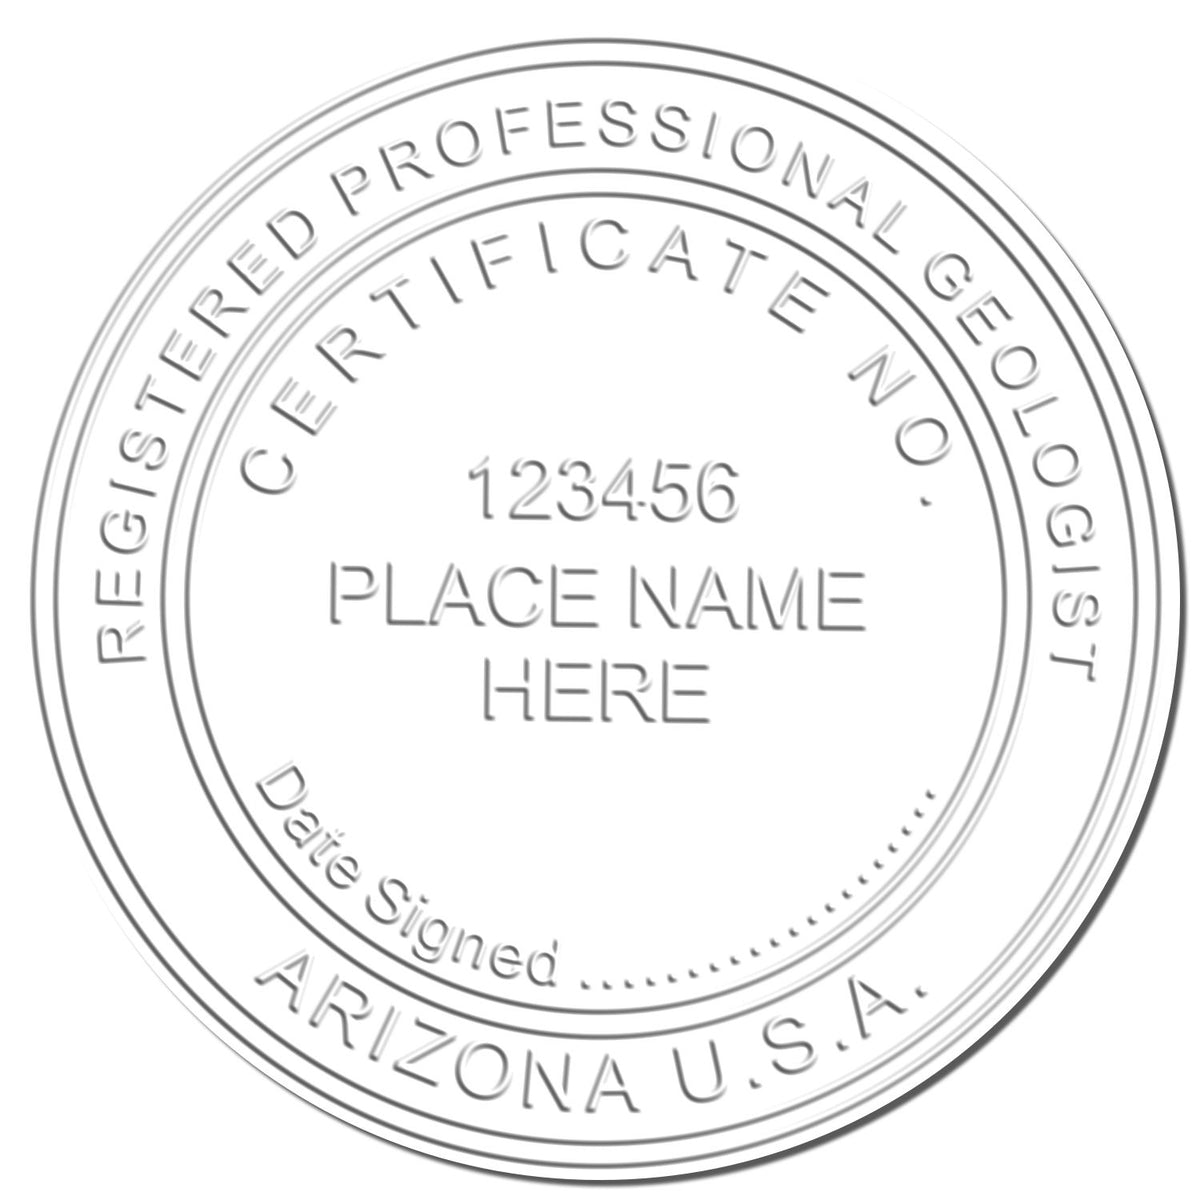 A stamped imprint of the Soft Arizona Professional Geologist Seal in this stylish lifestyle photo, setting the tone for a unique and personalized product.